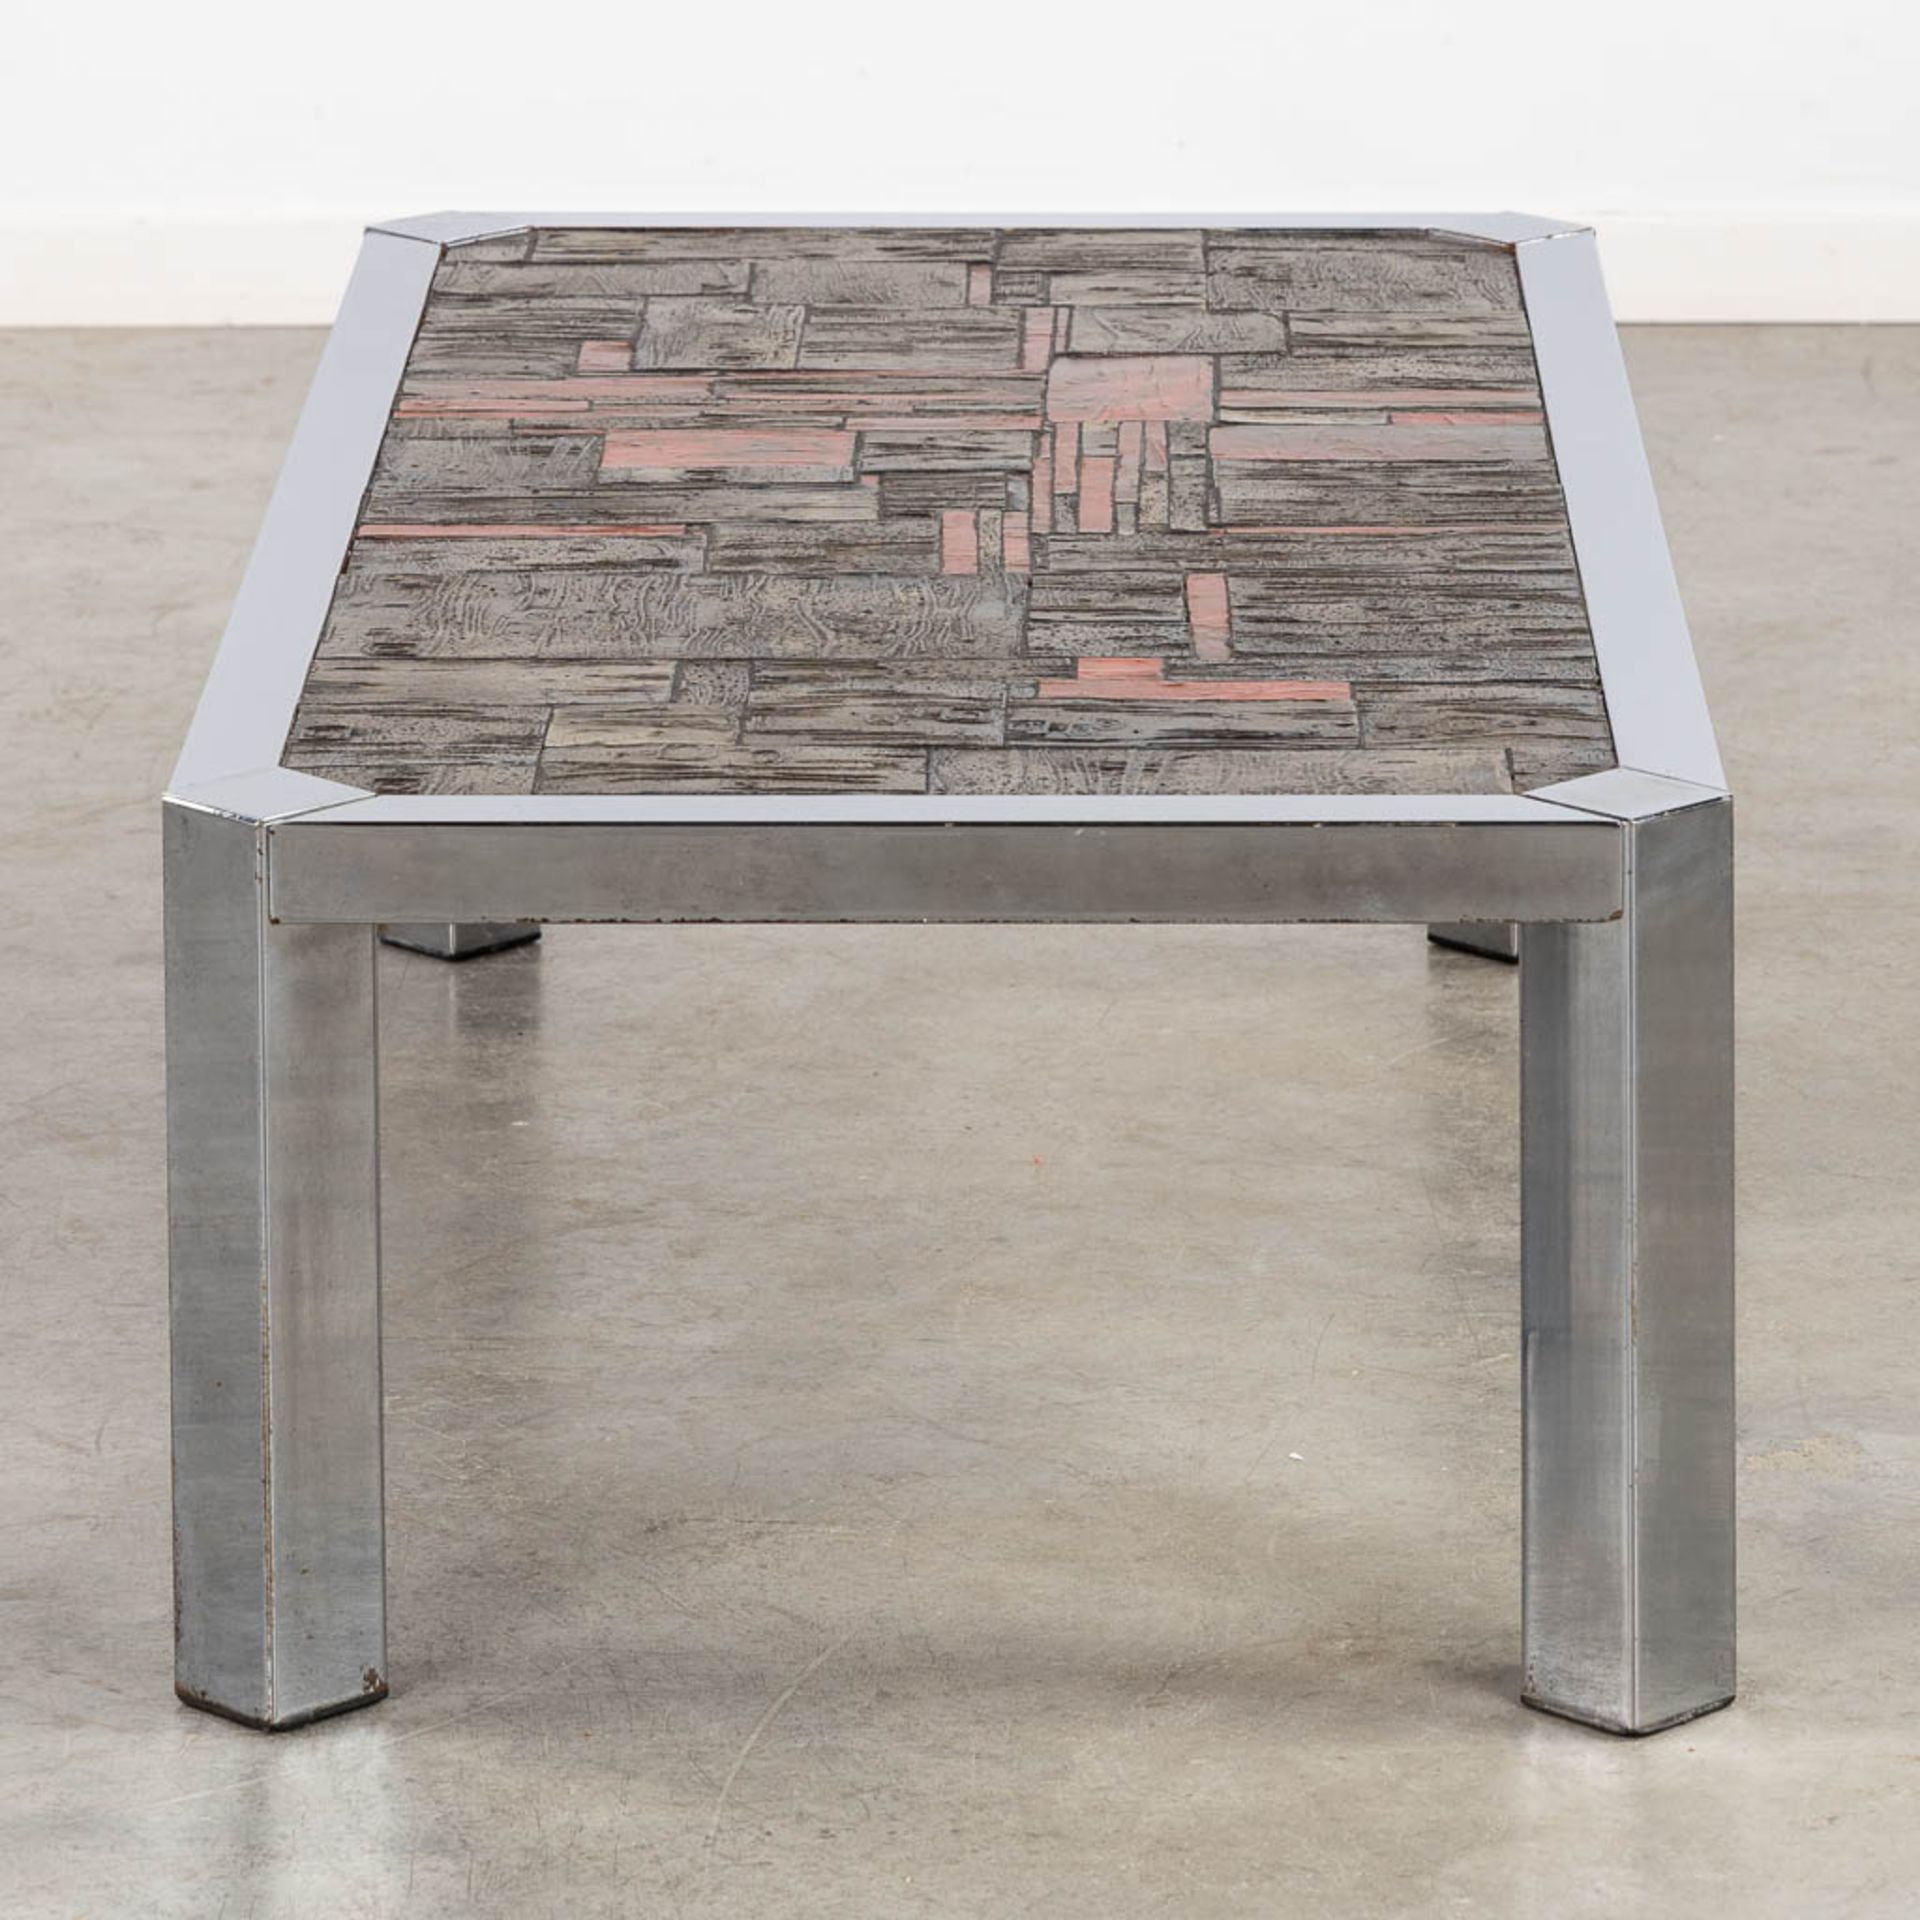 A mid-century coffee table with a ceramic tile top, circa 1960. (L:60 x W:120 x H:36 cm) - Image 4 of 10